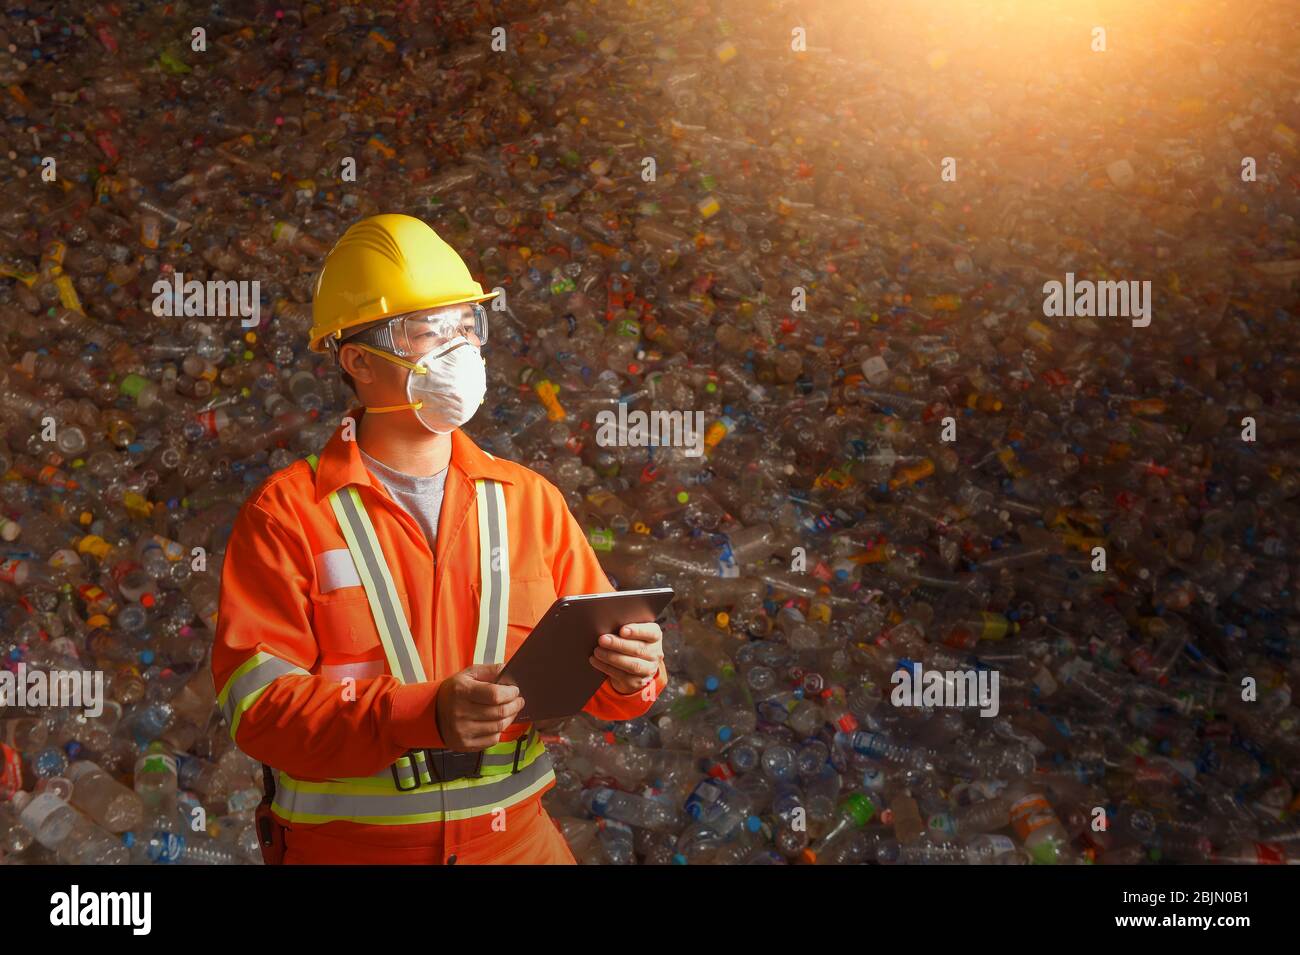 Man working in a recycling center holding a digital tablet, Thailand Stock Photo